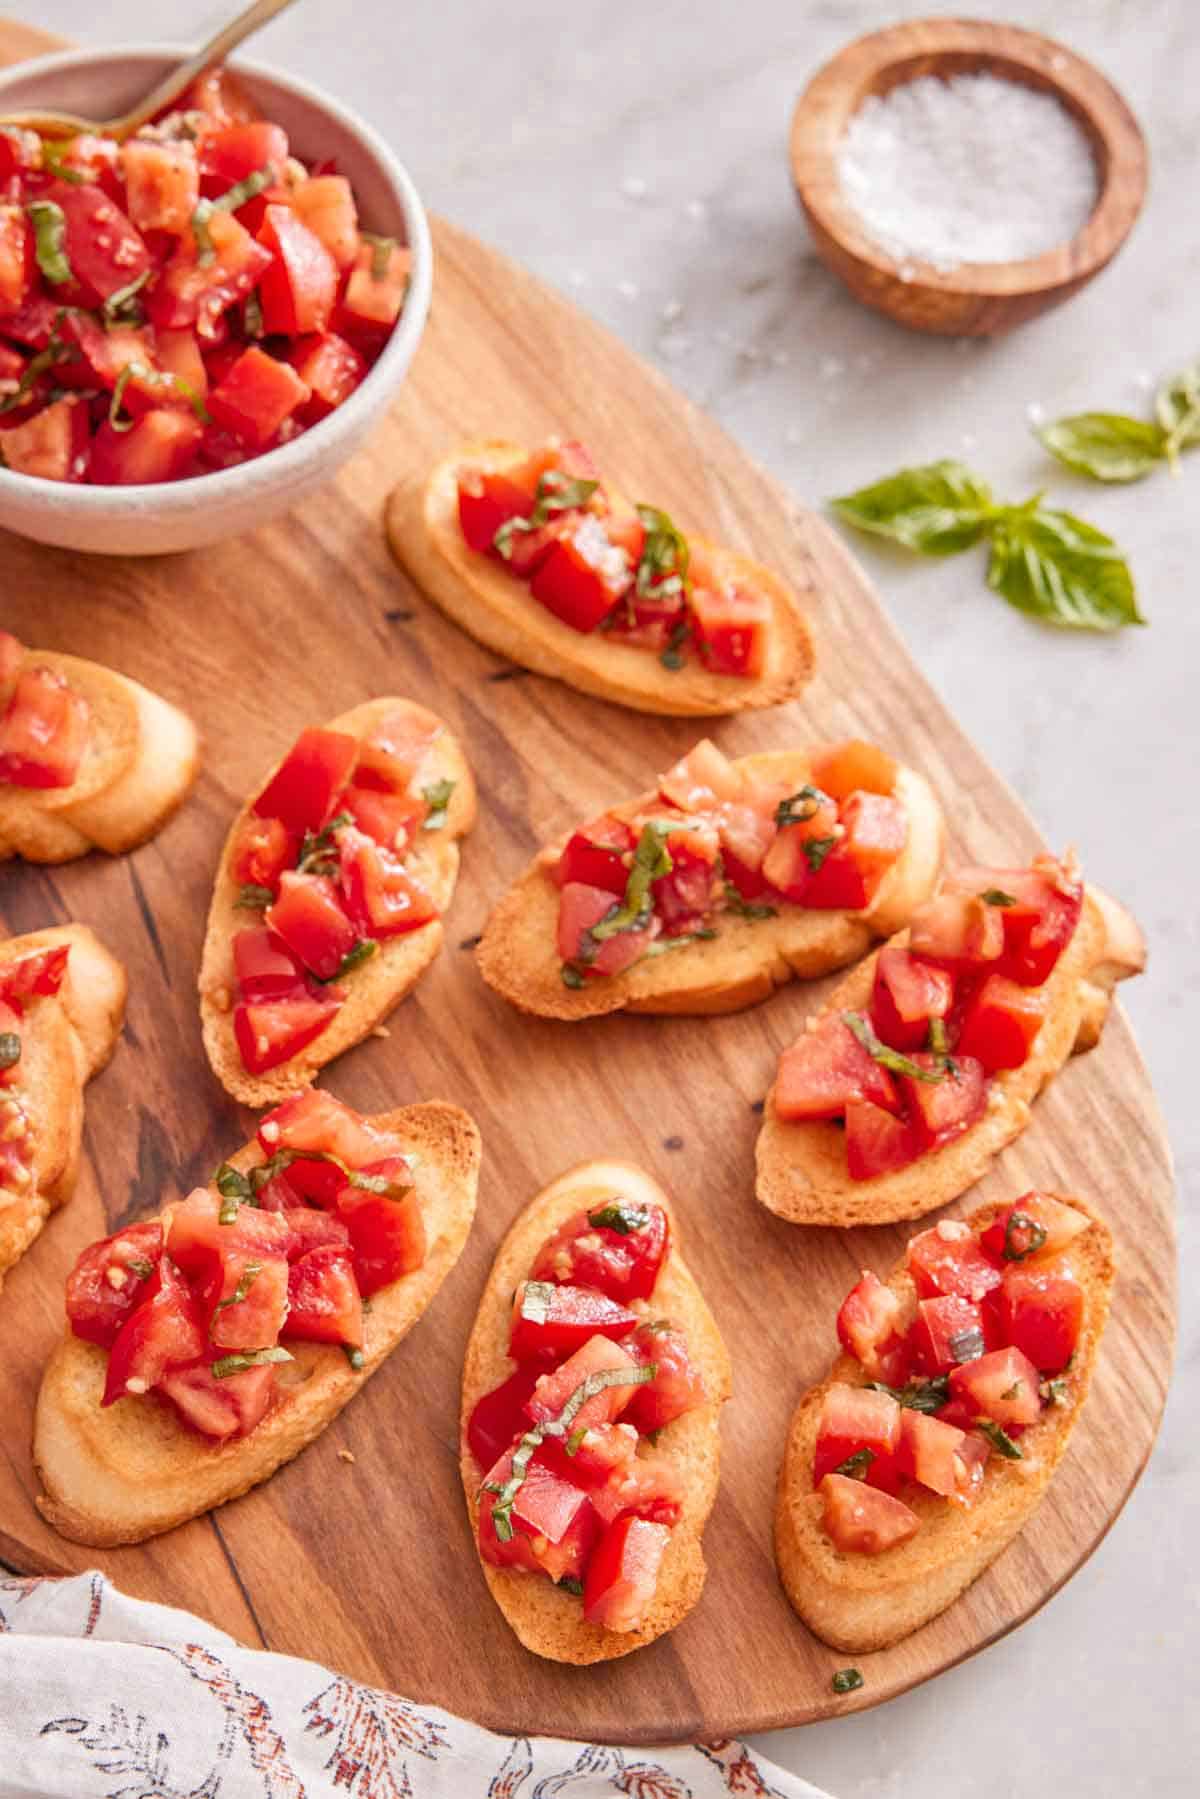 Overhead view of a wooden serving board with multiple pieces of bruschetta with a bowl of tomatoes by it.